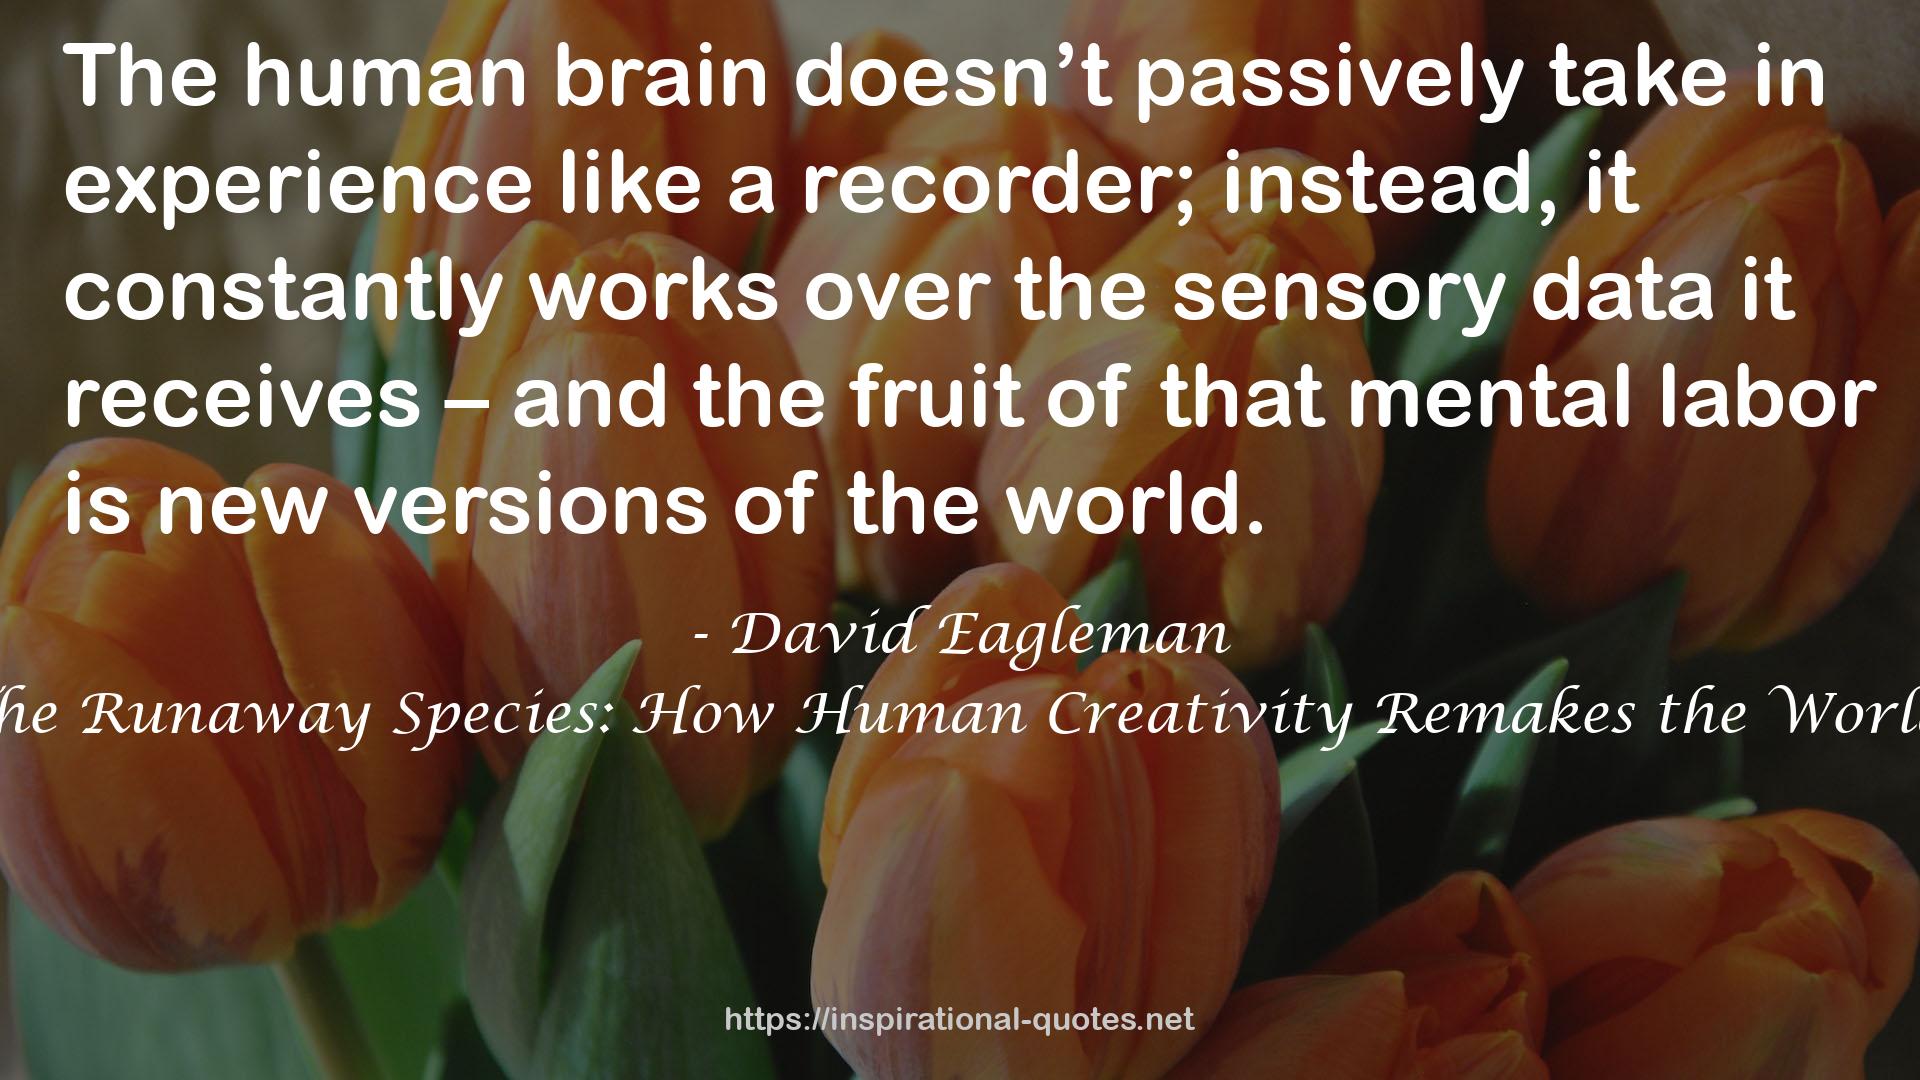 The Runaway Species: How Human Creativity Remakes the World QUOTES